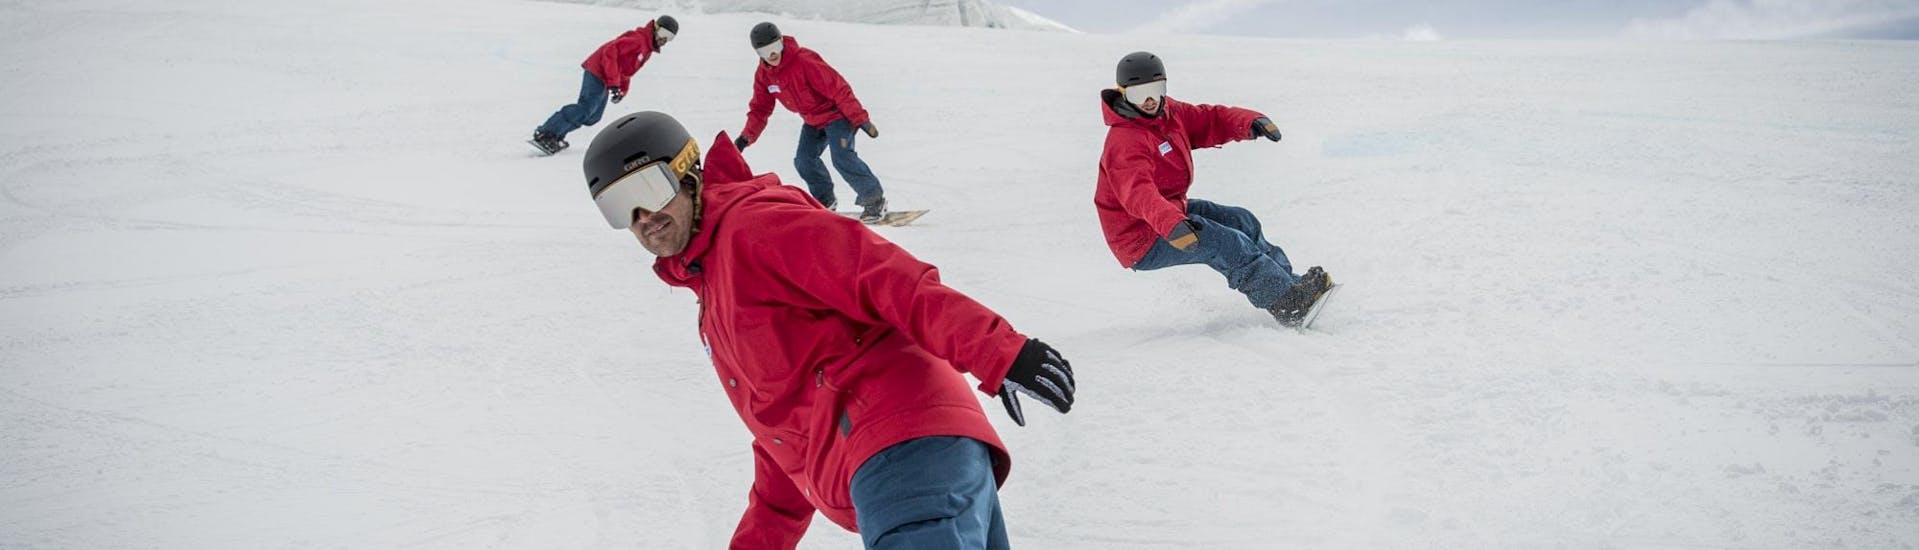 Adult Snowboarding Lessons for Advanced Boarders.